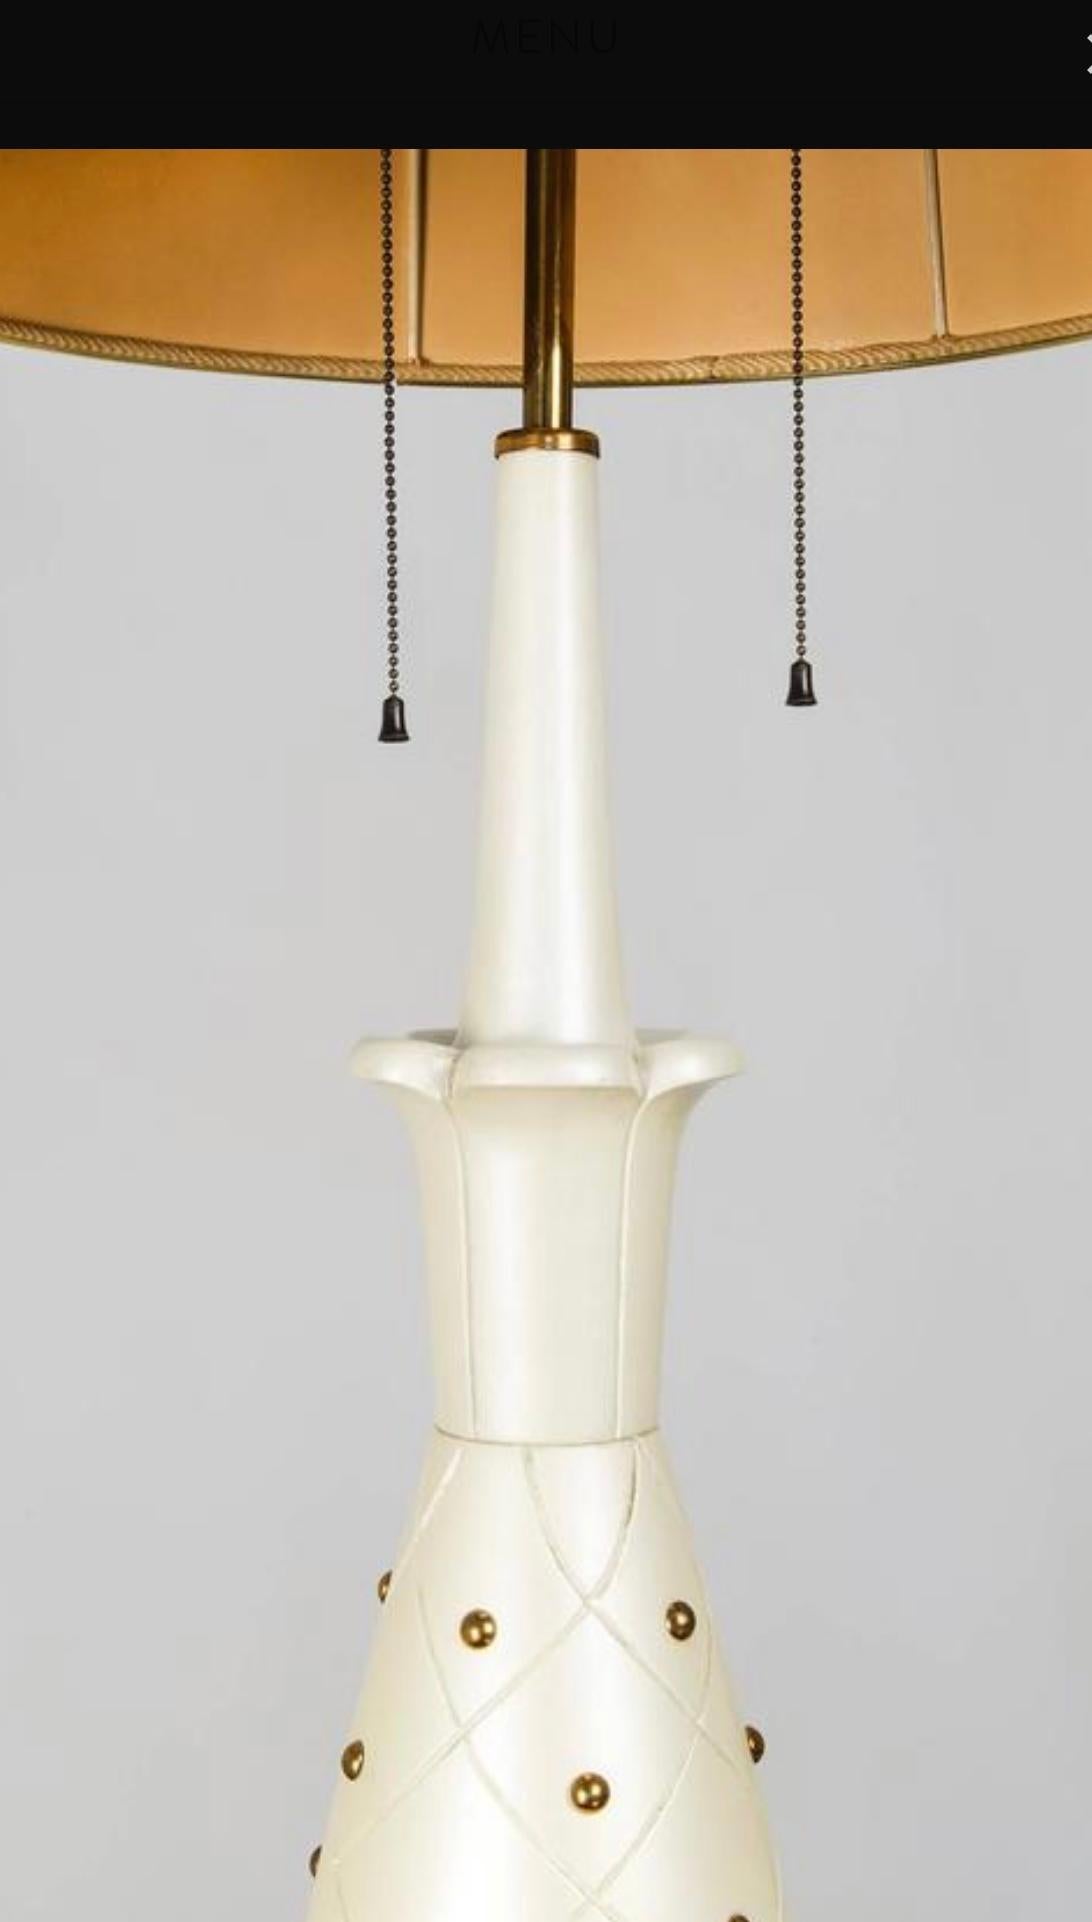 Circa 1950s attributed to Stilnovo pearlescent enamelled tall table lamp in carved wood and brass detailing depicting a pineapple. It has 2 light fixtures each operated by a brass pull switch. 



